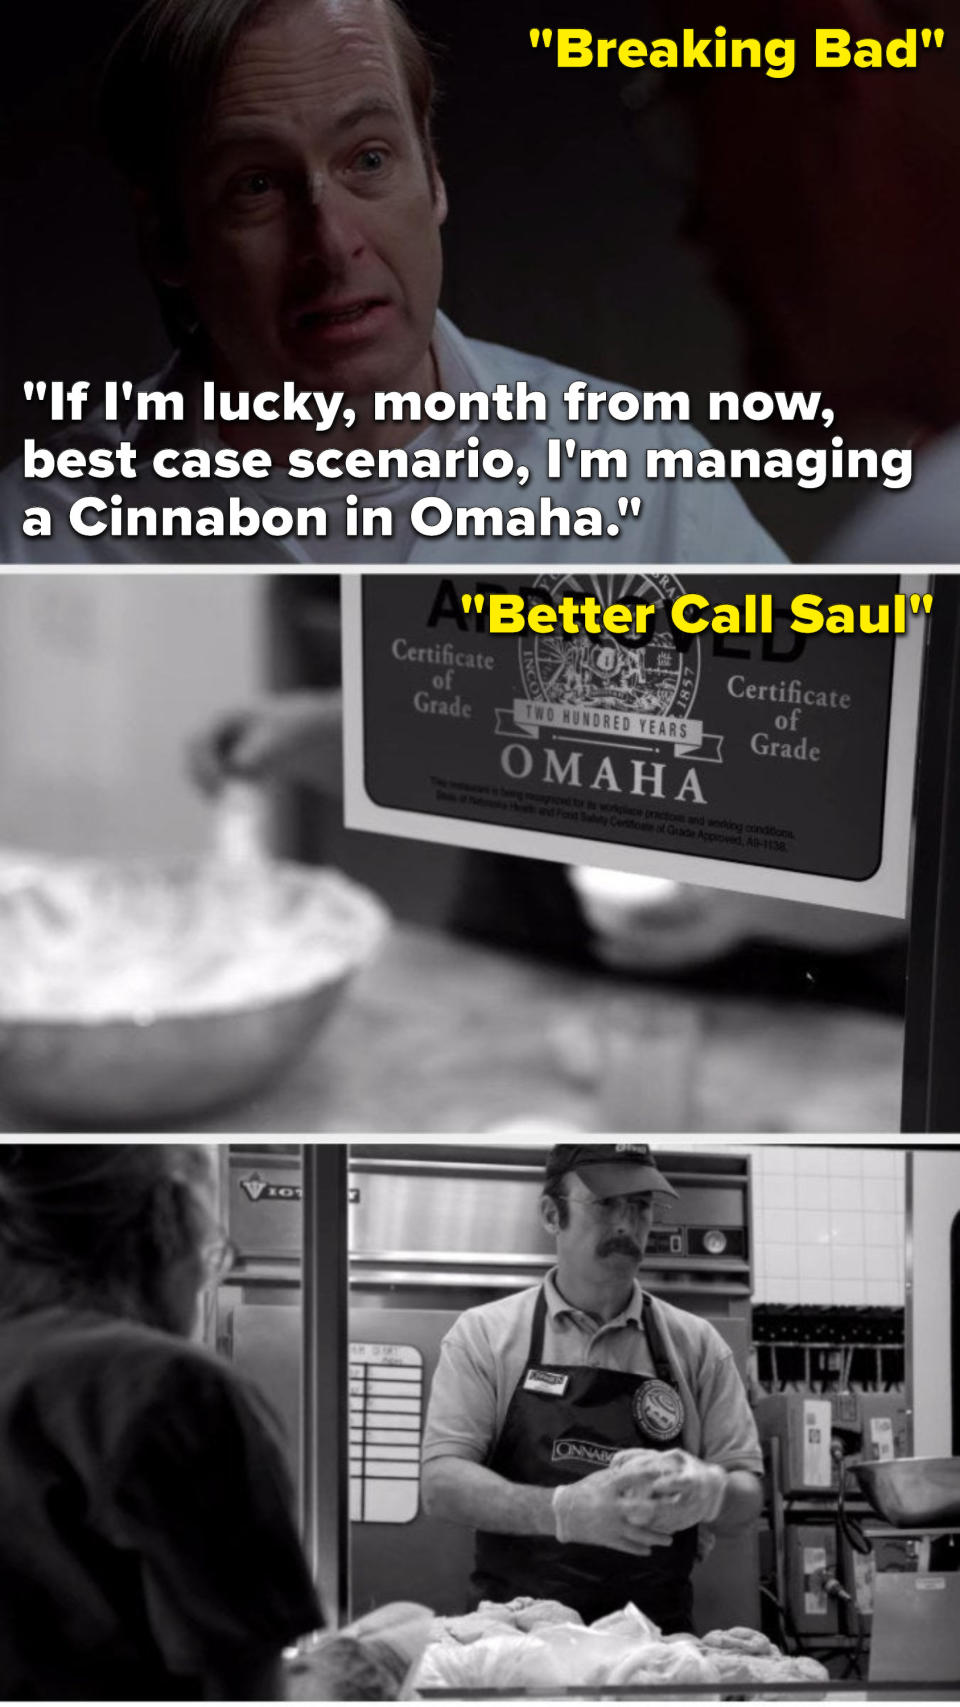 On Breaking Bad, Sauls says, "If I'm lucky, month from now, best case scenario, I'm managing a Cinnabon in Omaha," and in "Better Call Saul", he's working at a Cinnabon in Omaha